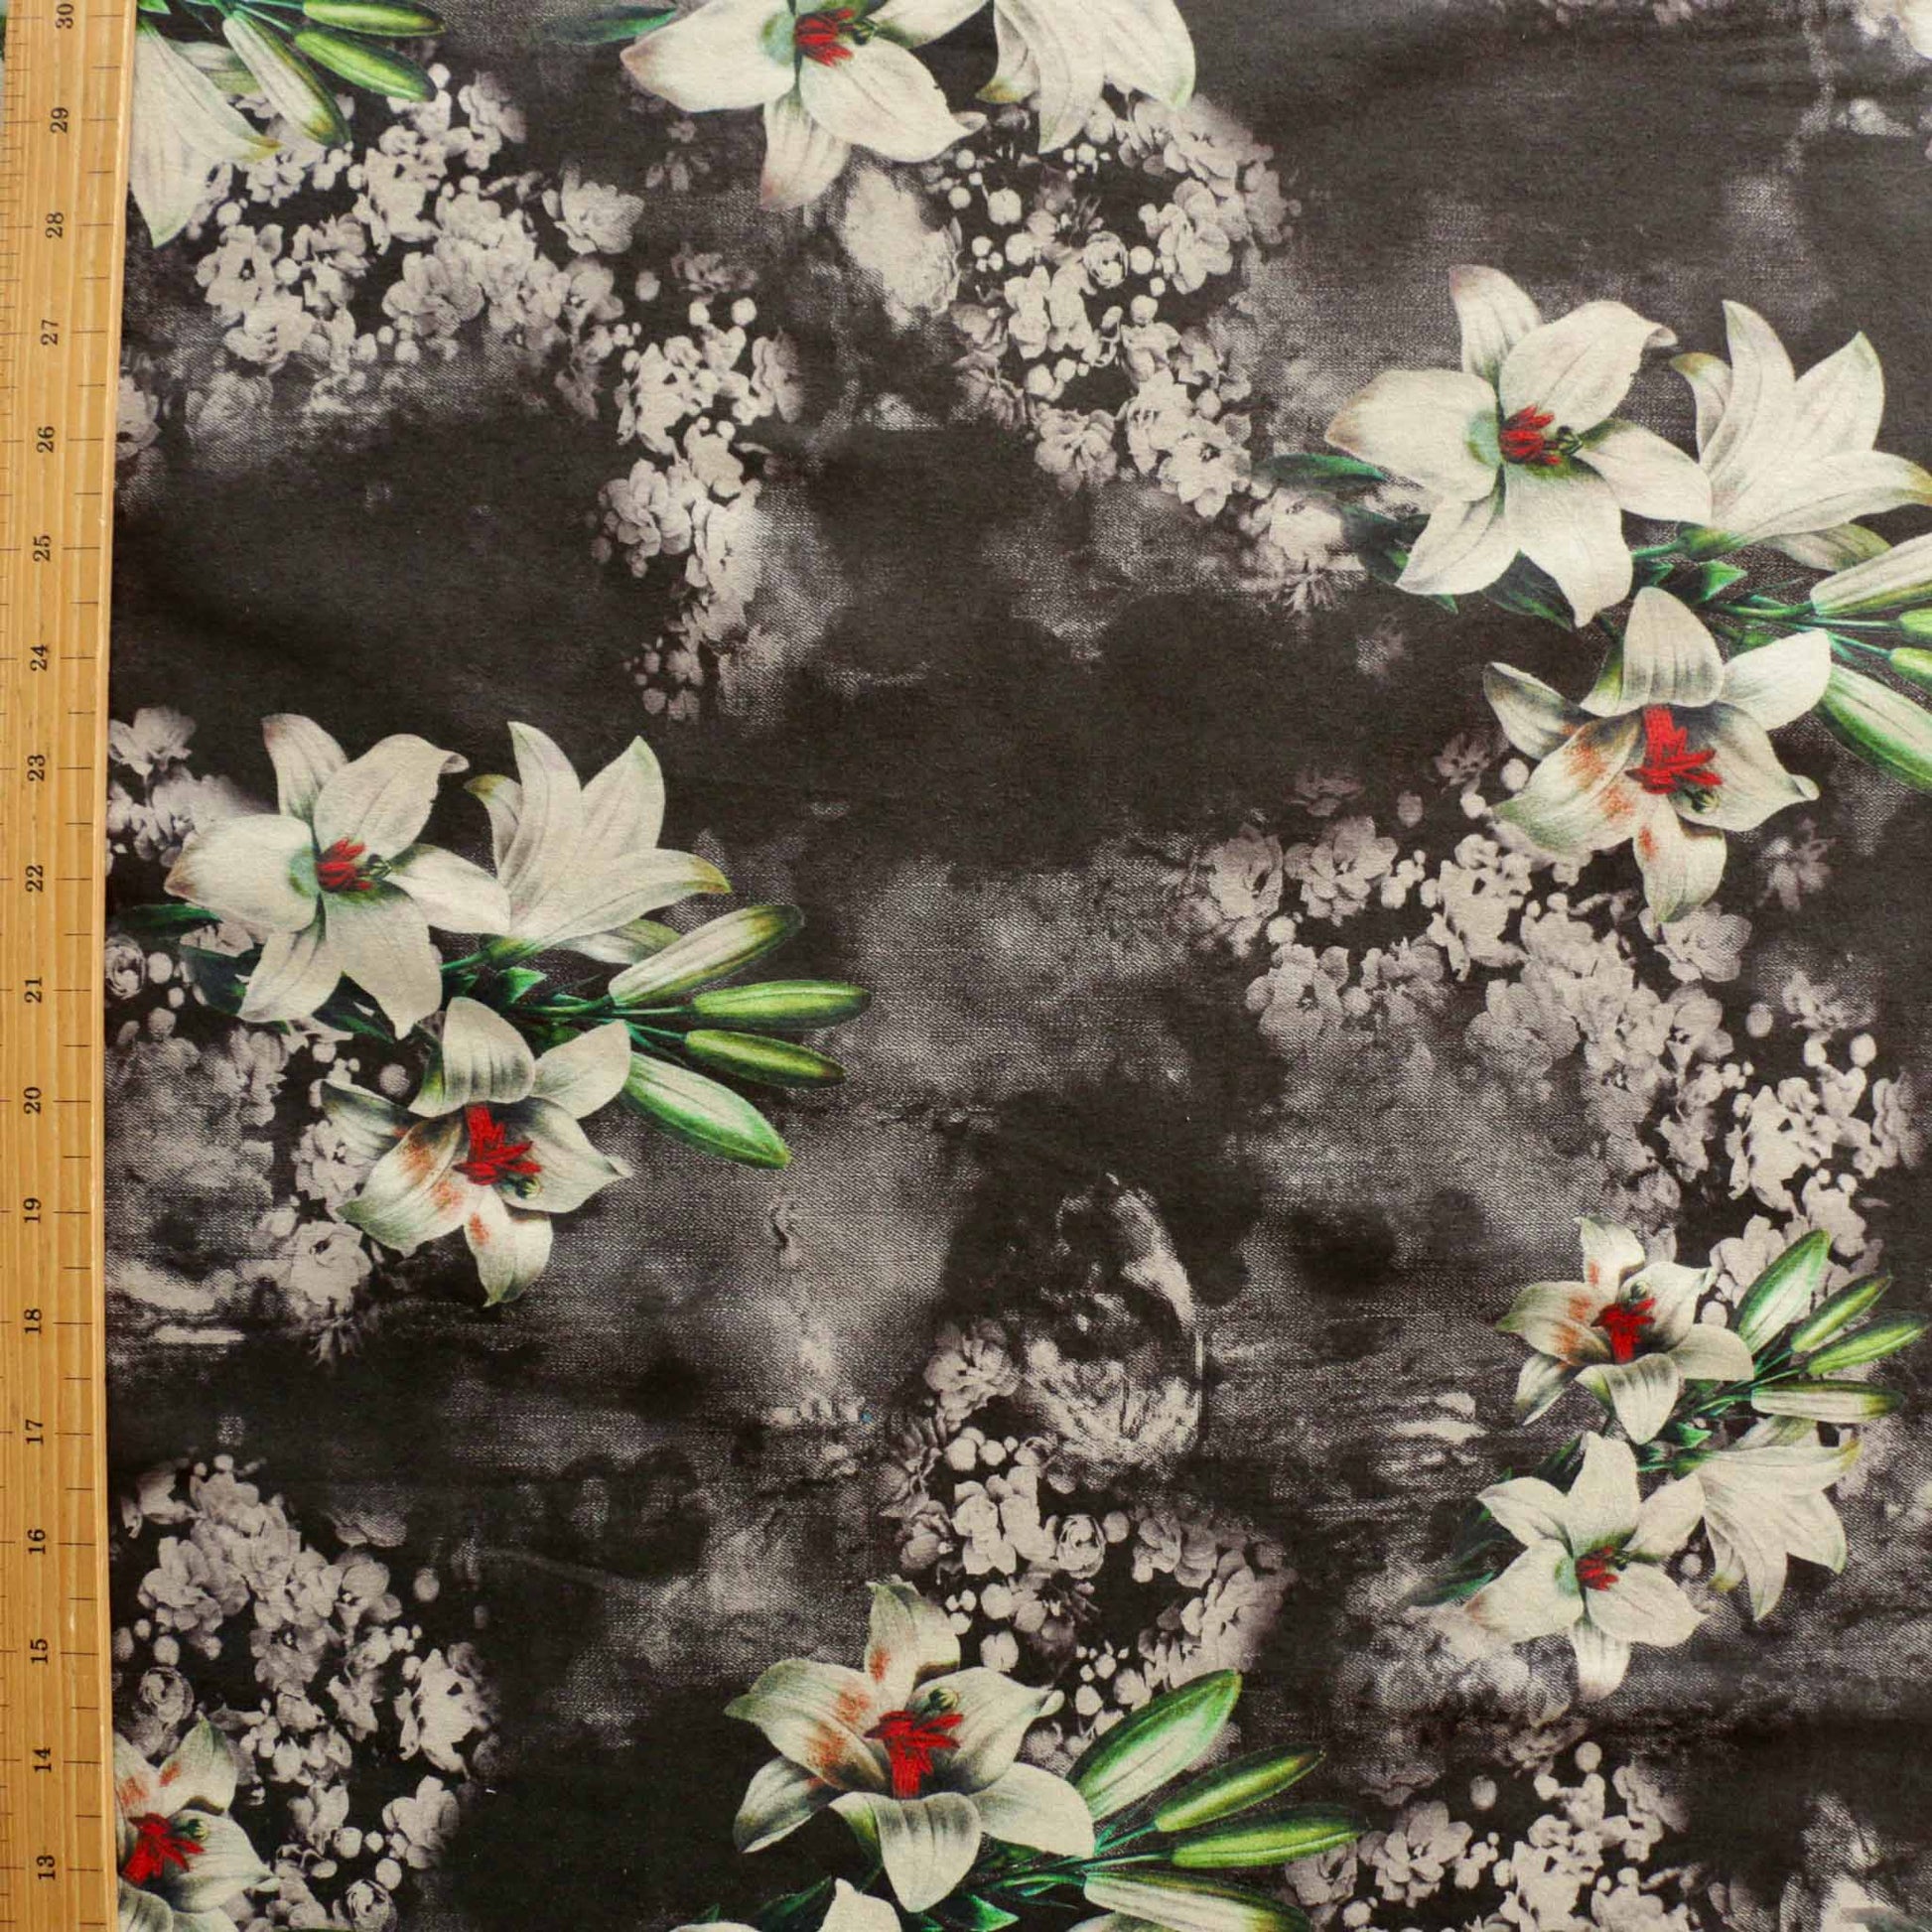 metre suede moleskin dressmaking fabric in black with white lily flower design